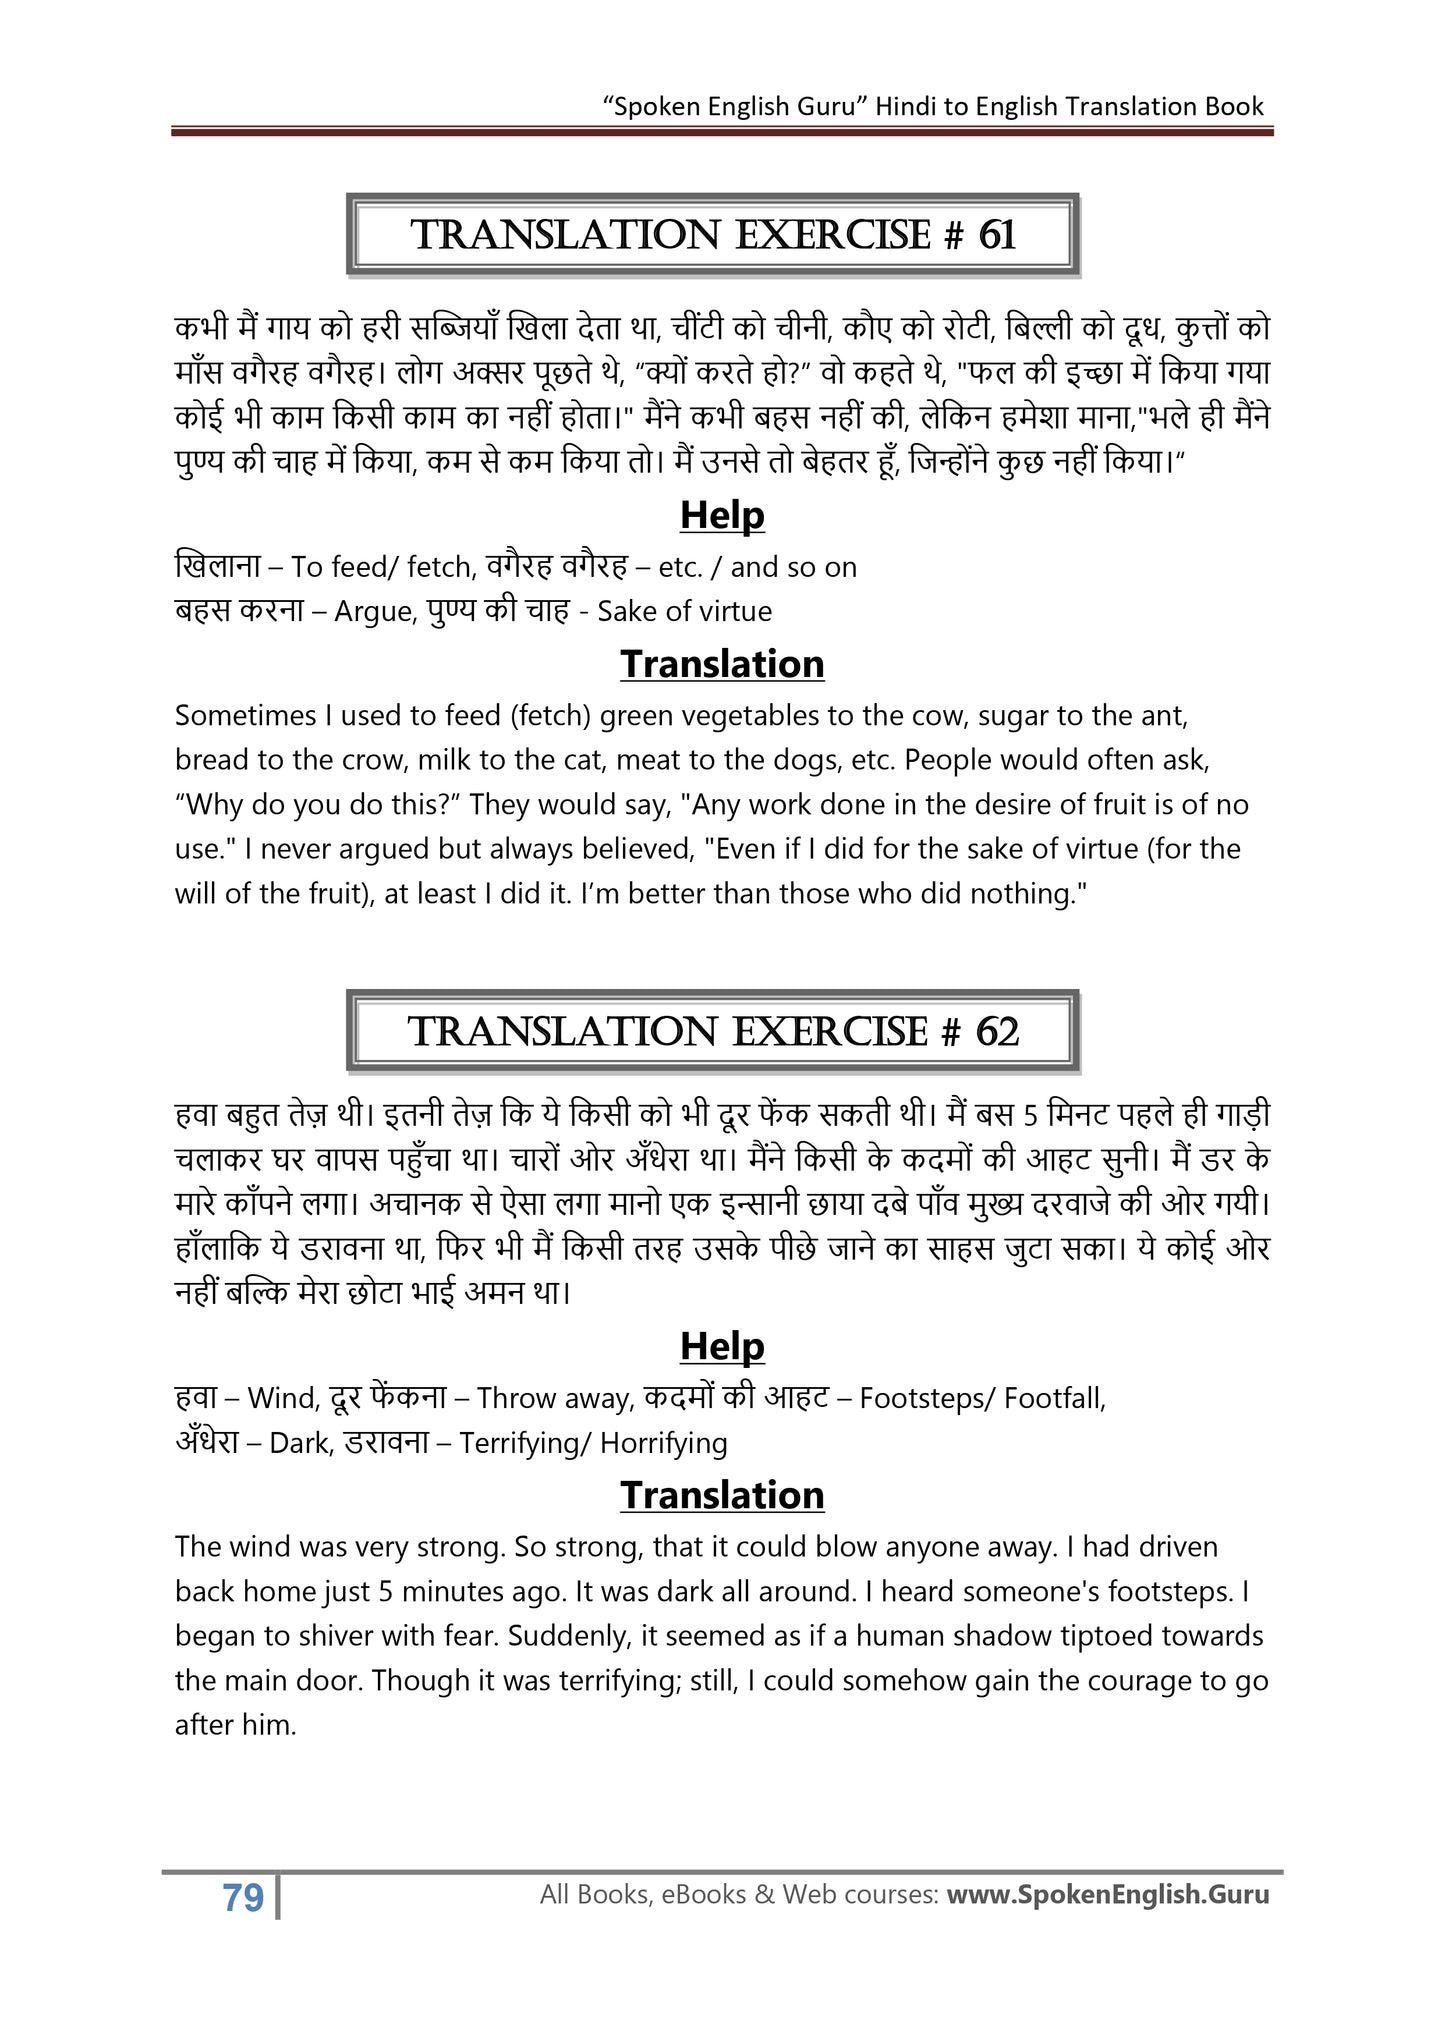 Hindi to English Translation Book - Long and Short Paragraphs Included